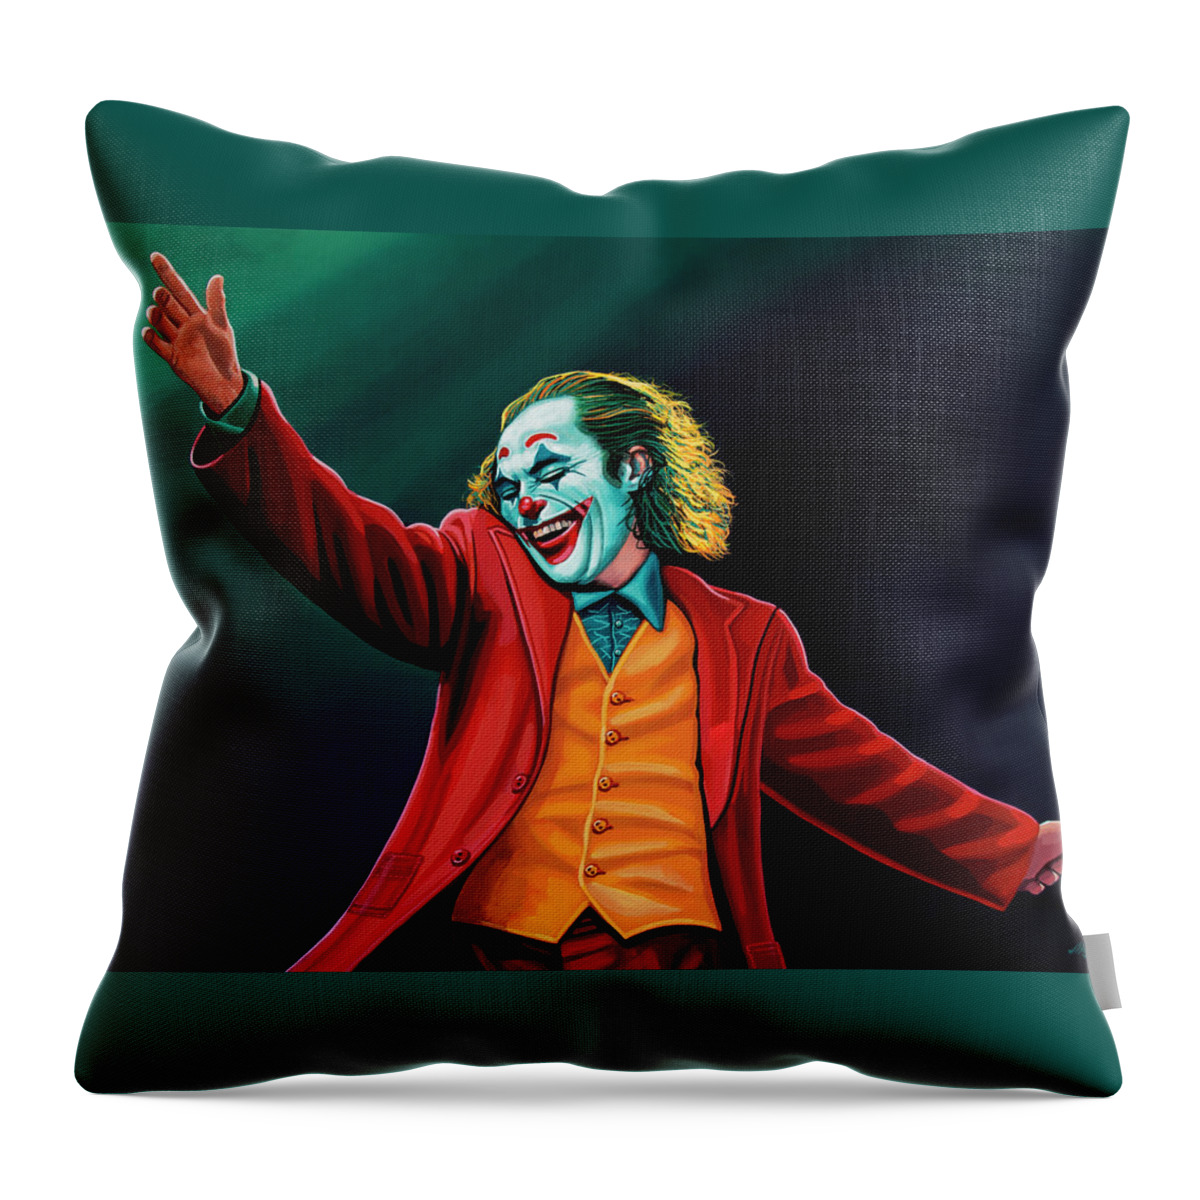 Joaquin Phoenix Throw Pillow featuring the painting Joaquin in Joker Painting by Paul Meijering